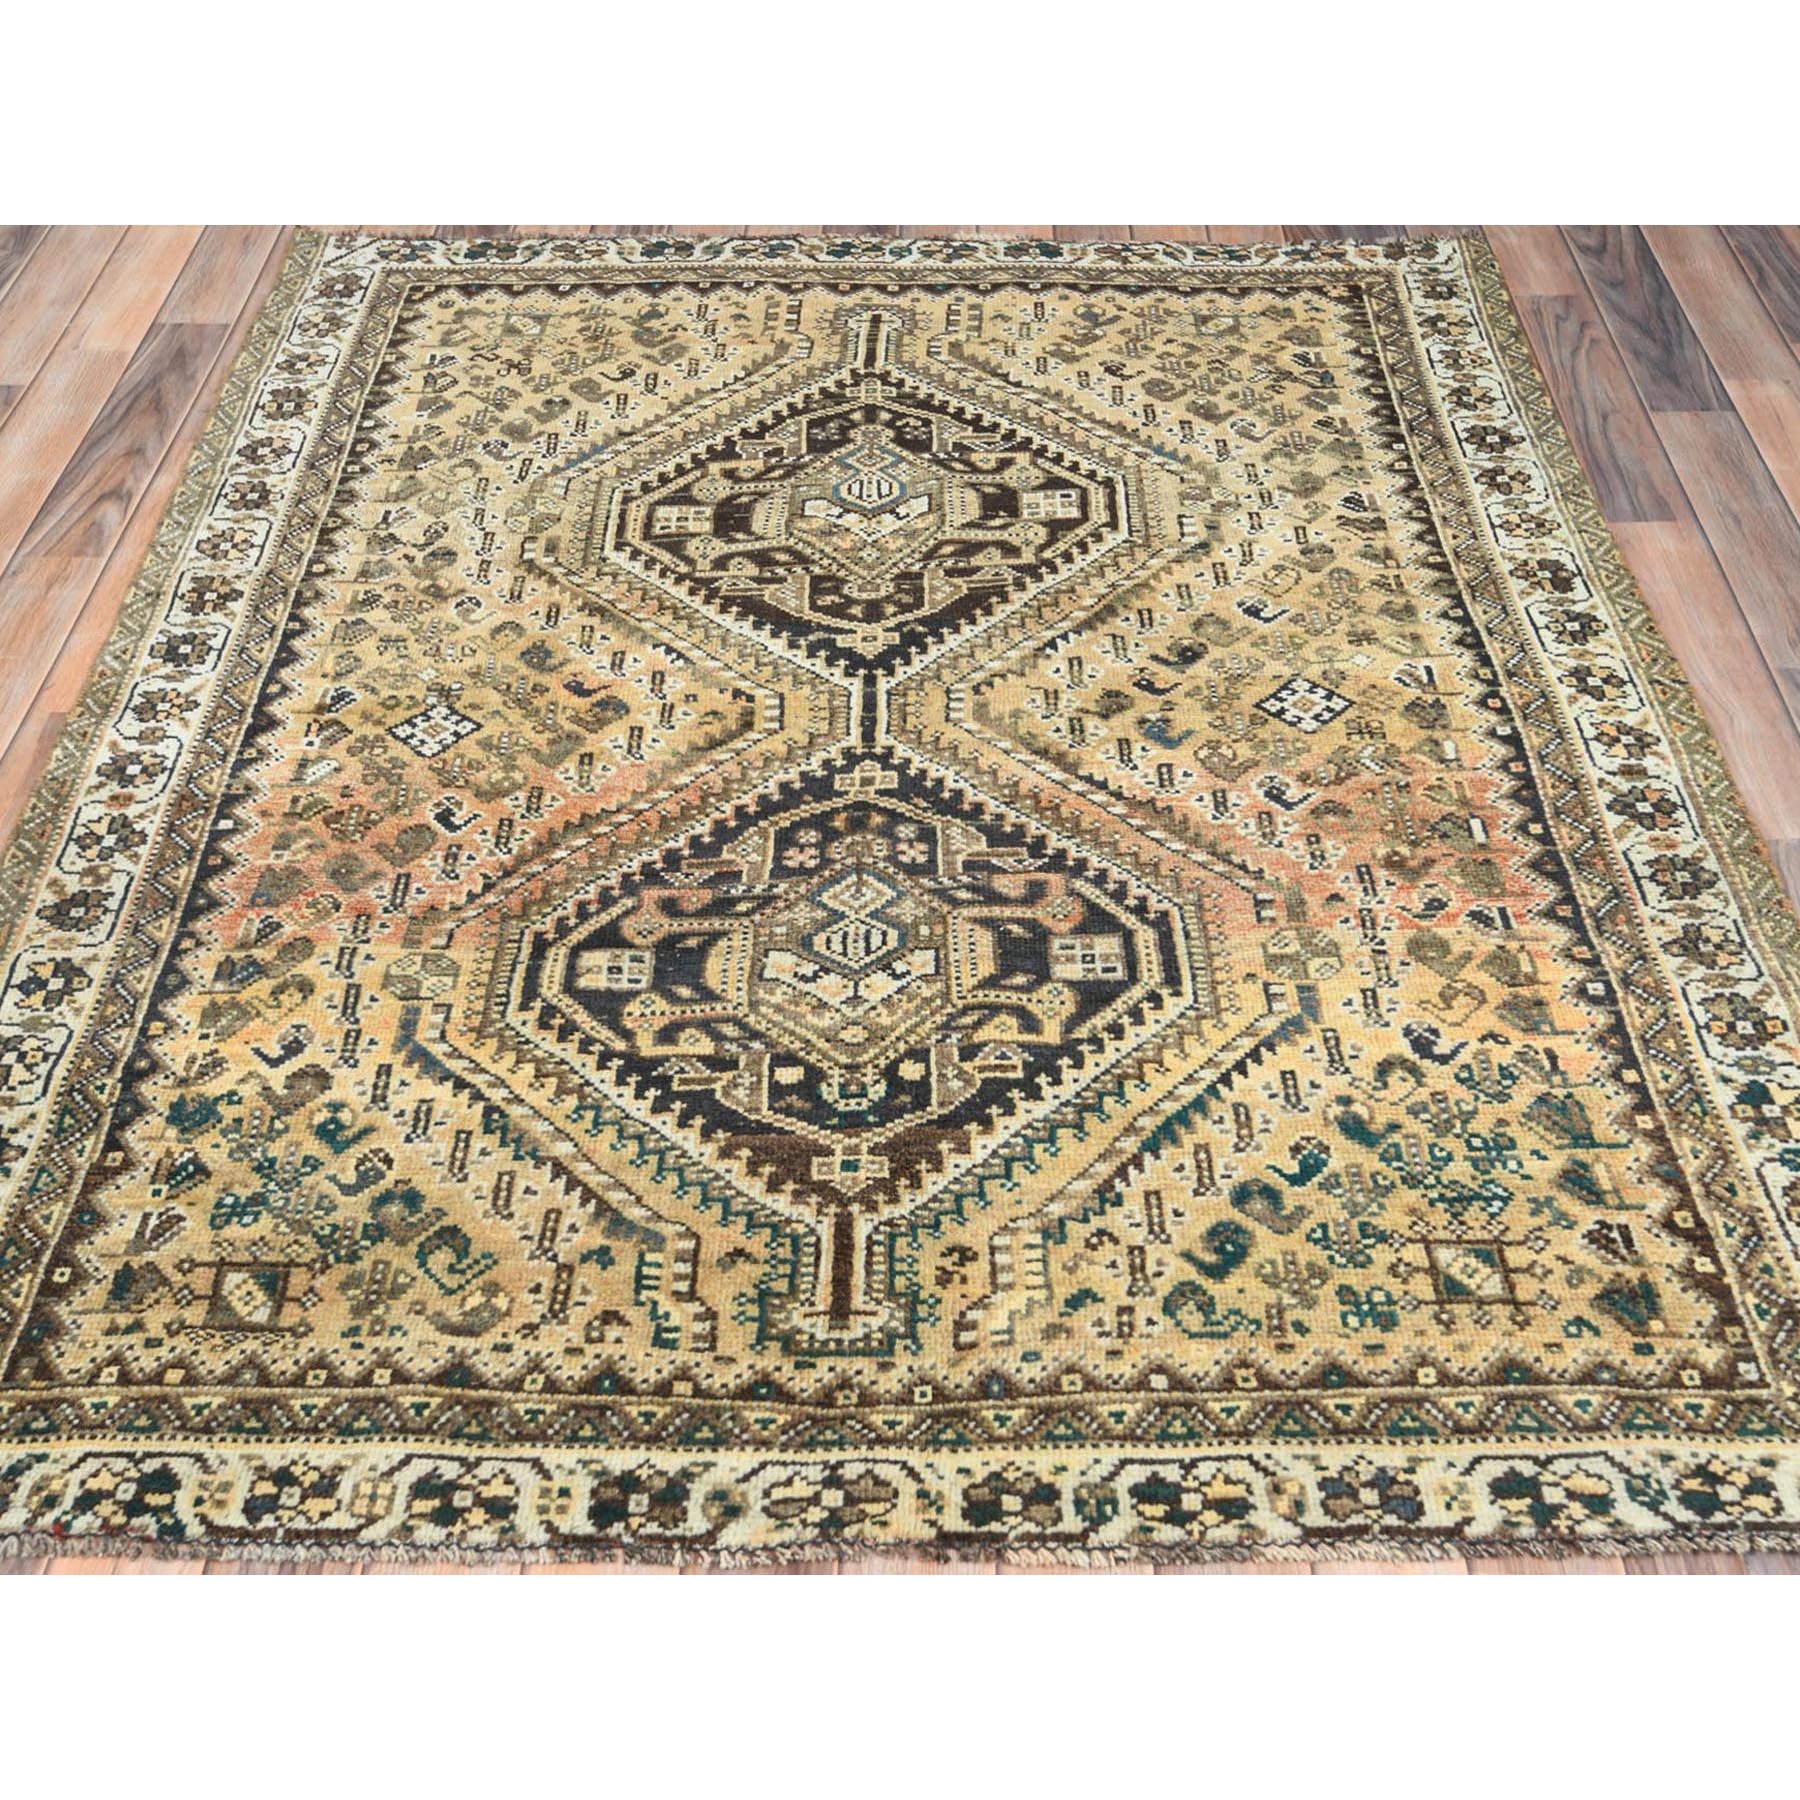 4'10"x6' Sand Color, Vintage Persian Shiraz with Geometric Medallion Design, Abrash, Hand Woven, Pure Wool, Distressed Look Cropped Thin Squarish Oriental Rug 